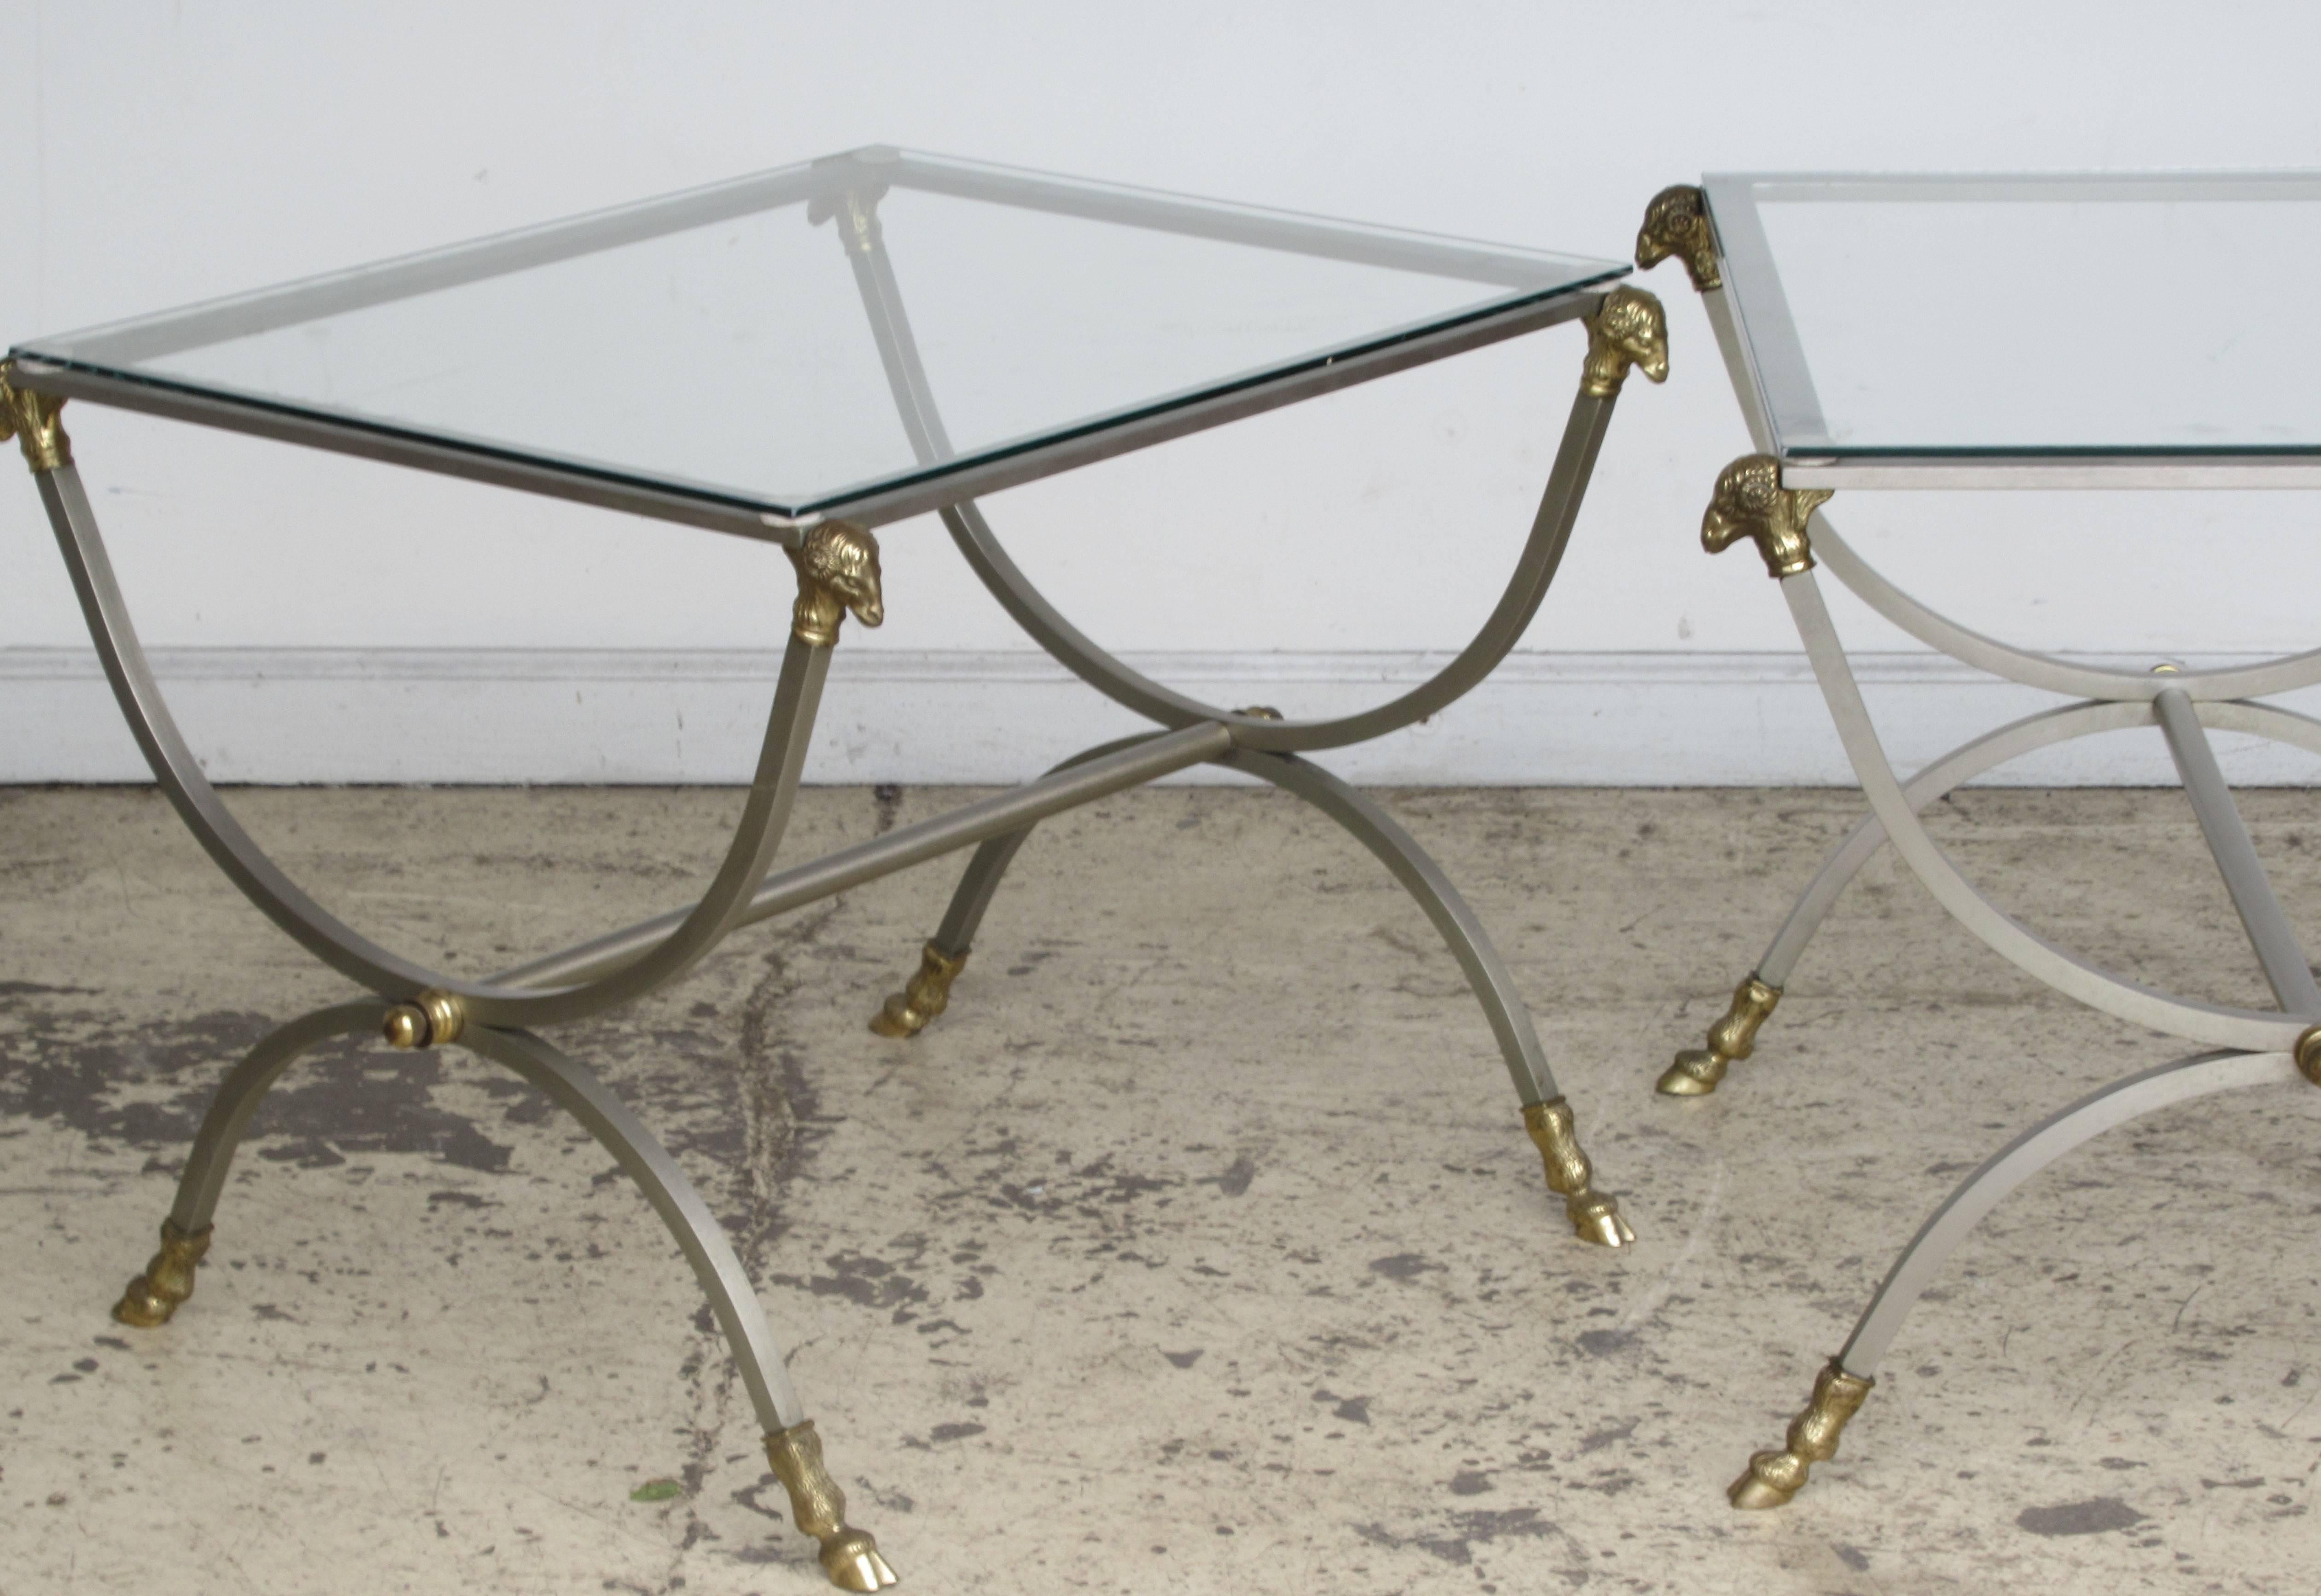  Neoclassical Steel and Bronze Tables  1